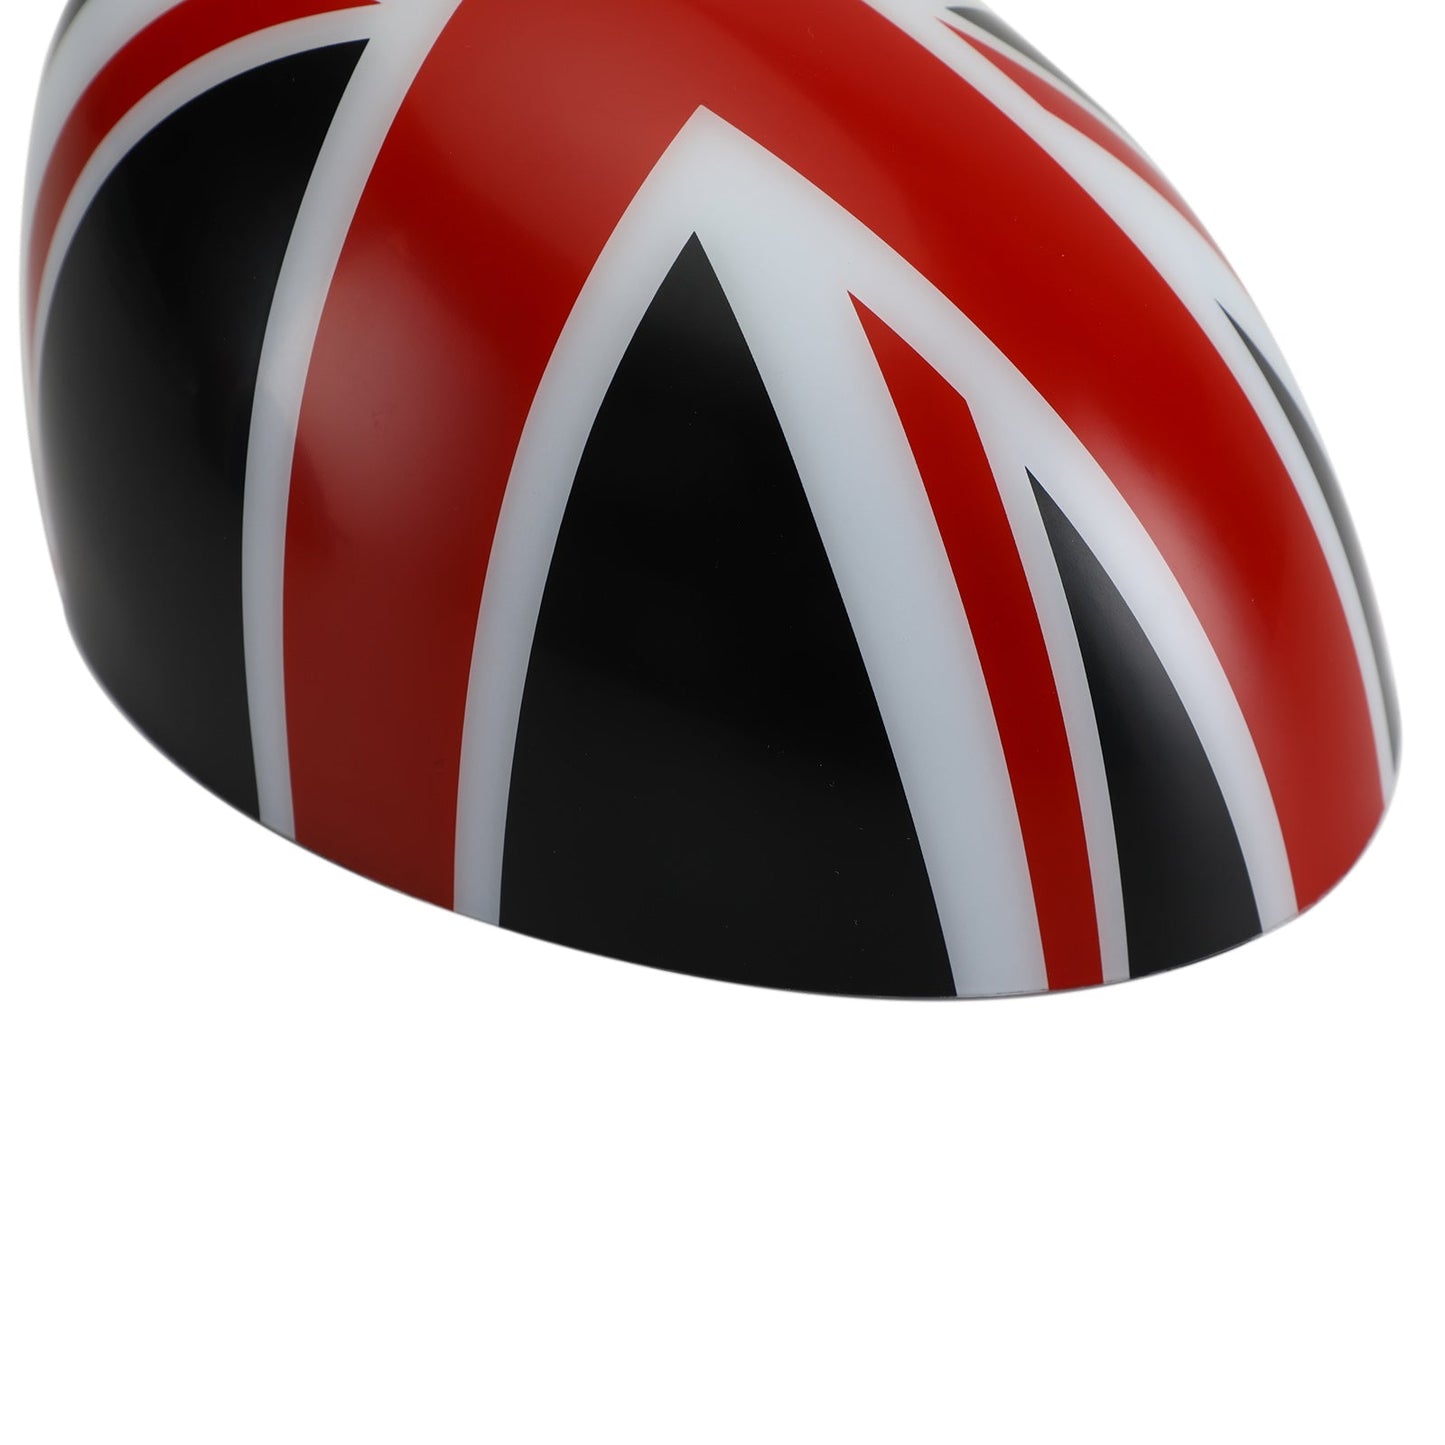 2 x Union Jack UK Flag Mirror Covers for MINI Cooper R55 R56 R57 Black/Red